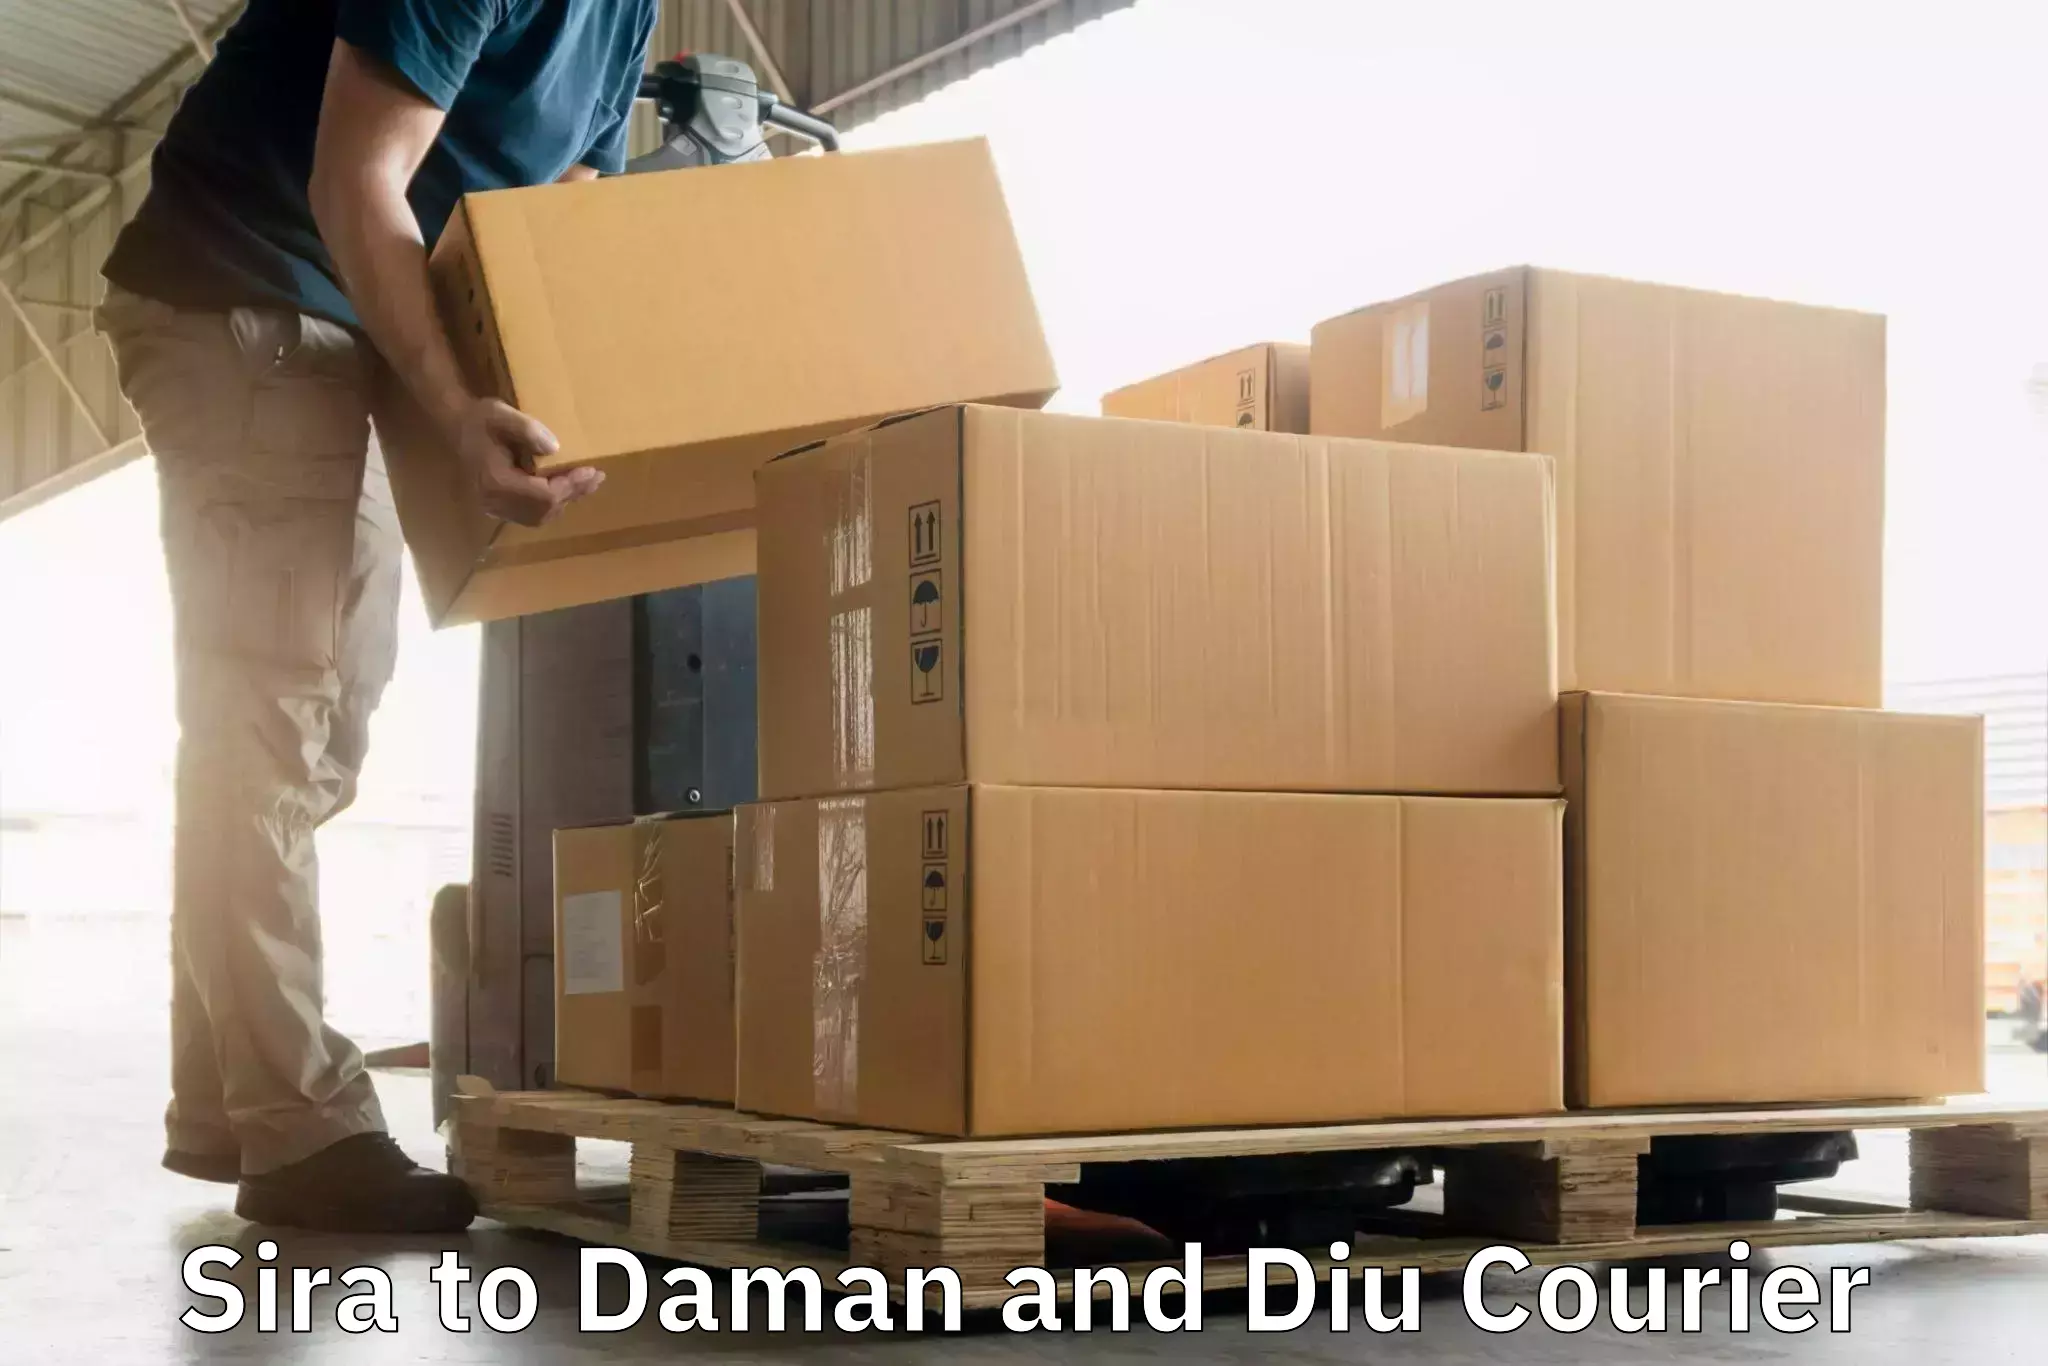 On-call courier service Sira to Daman and Diu